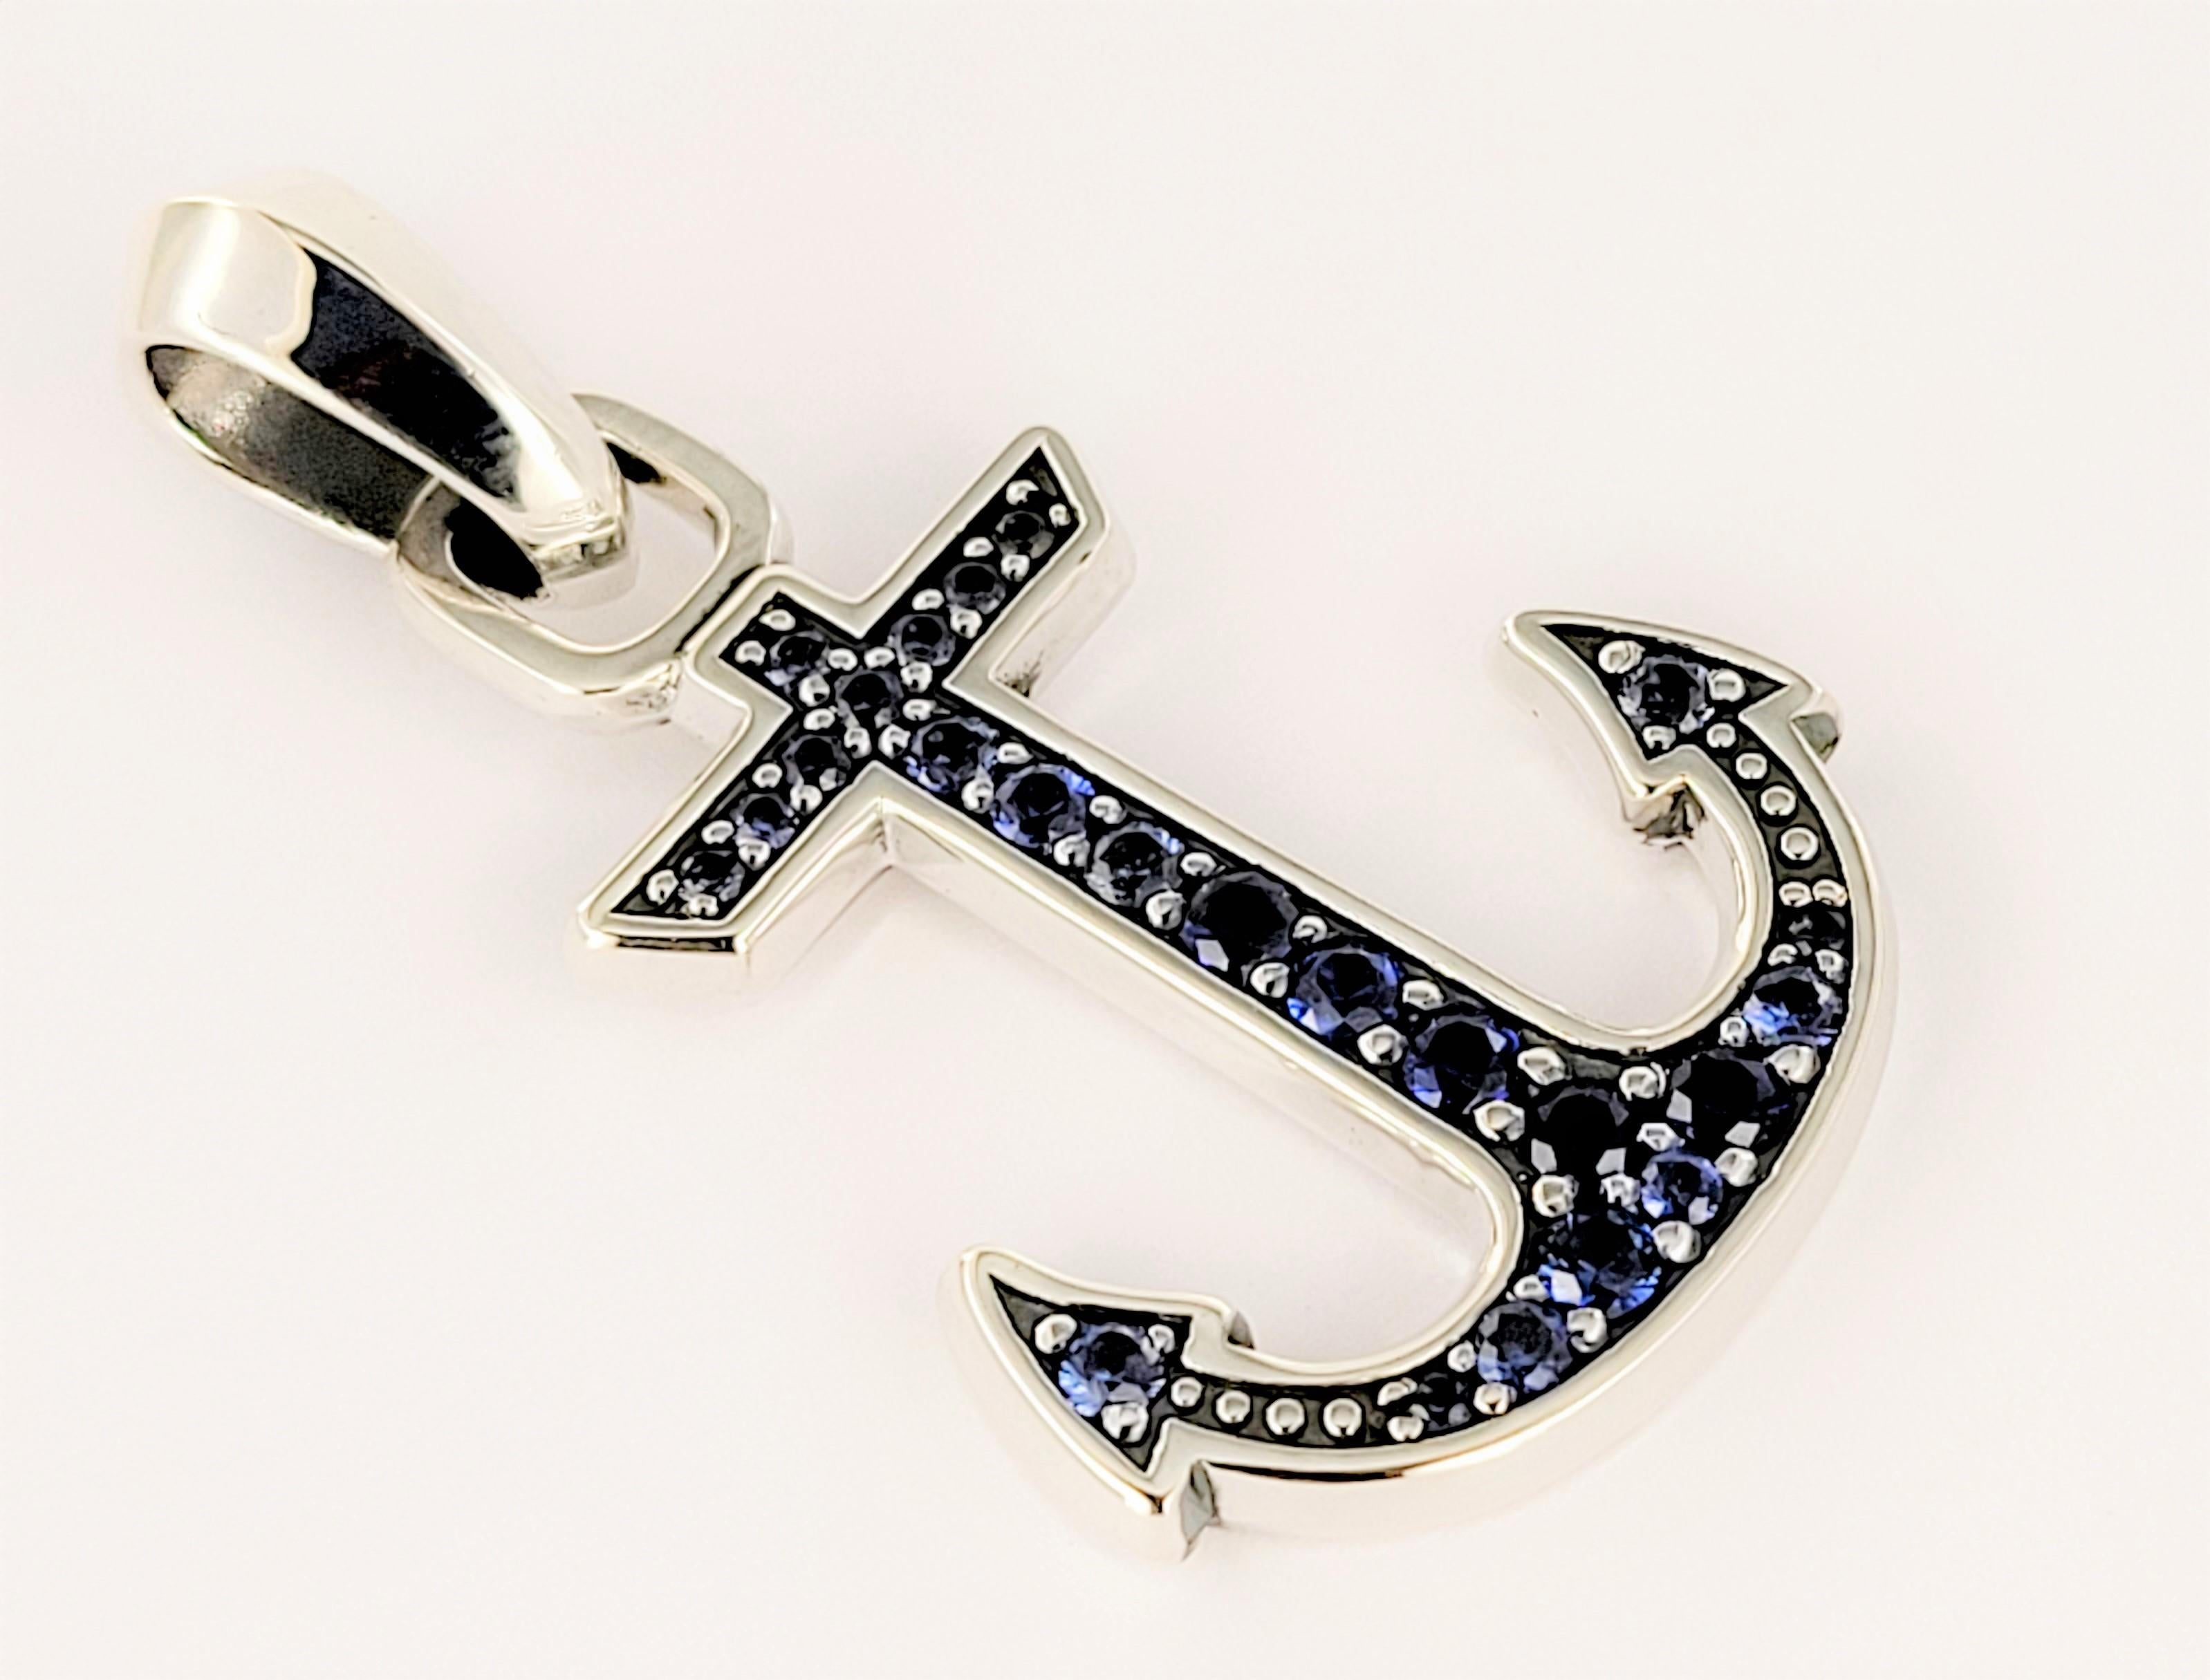 David Yurman 
Maritime Anchor Amulet
Material Sterling Silver
Metal Purity 925
Sapphire approx 0.57ctw
Pendant Length 35.5 mm
With Bail 43.7mm
Weight 8.8gr
Condition new, never worn
David Yurman Pouch Included 
Retail Price $895